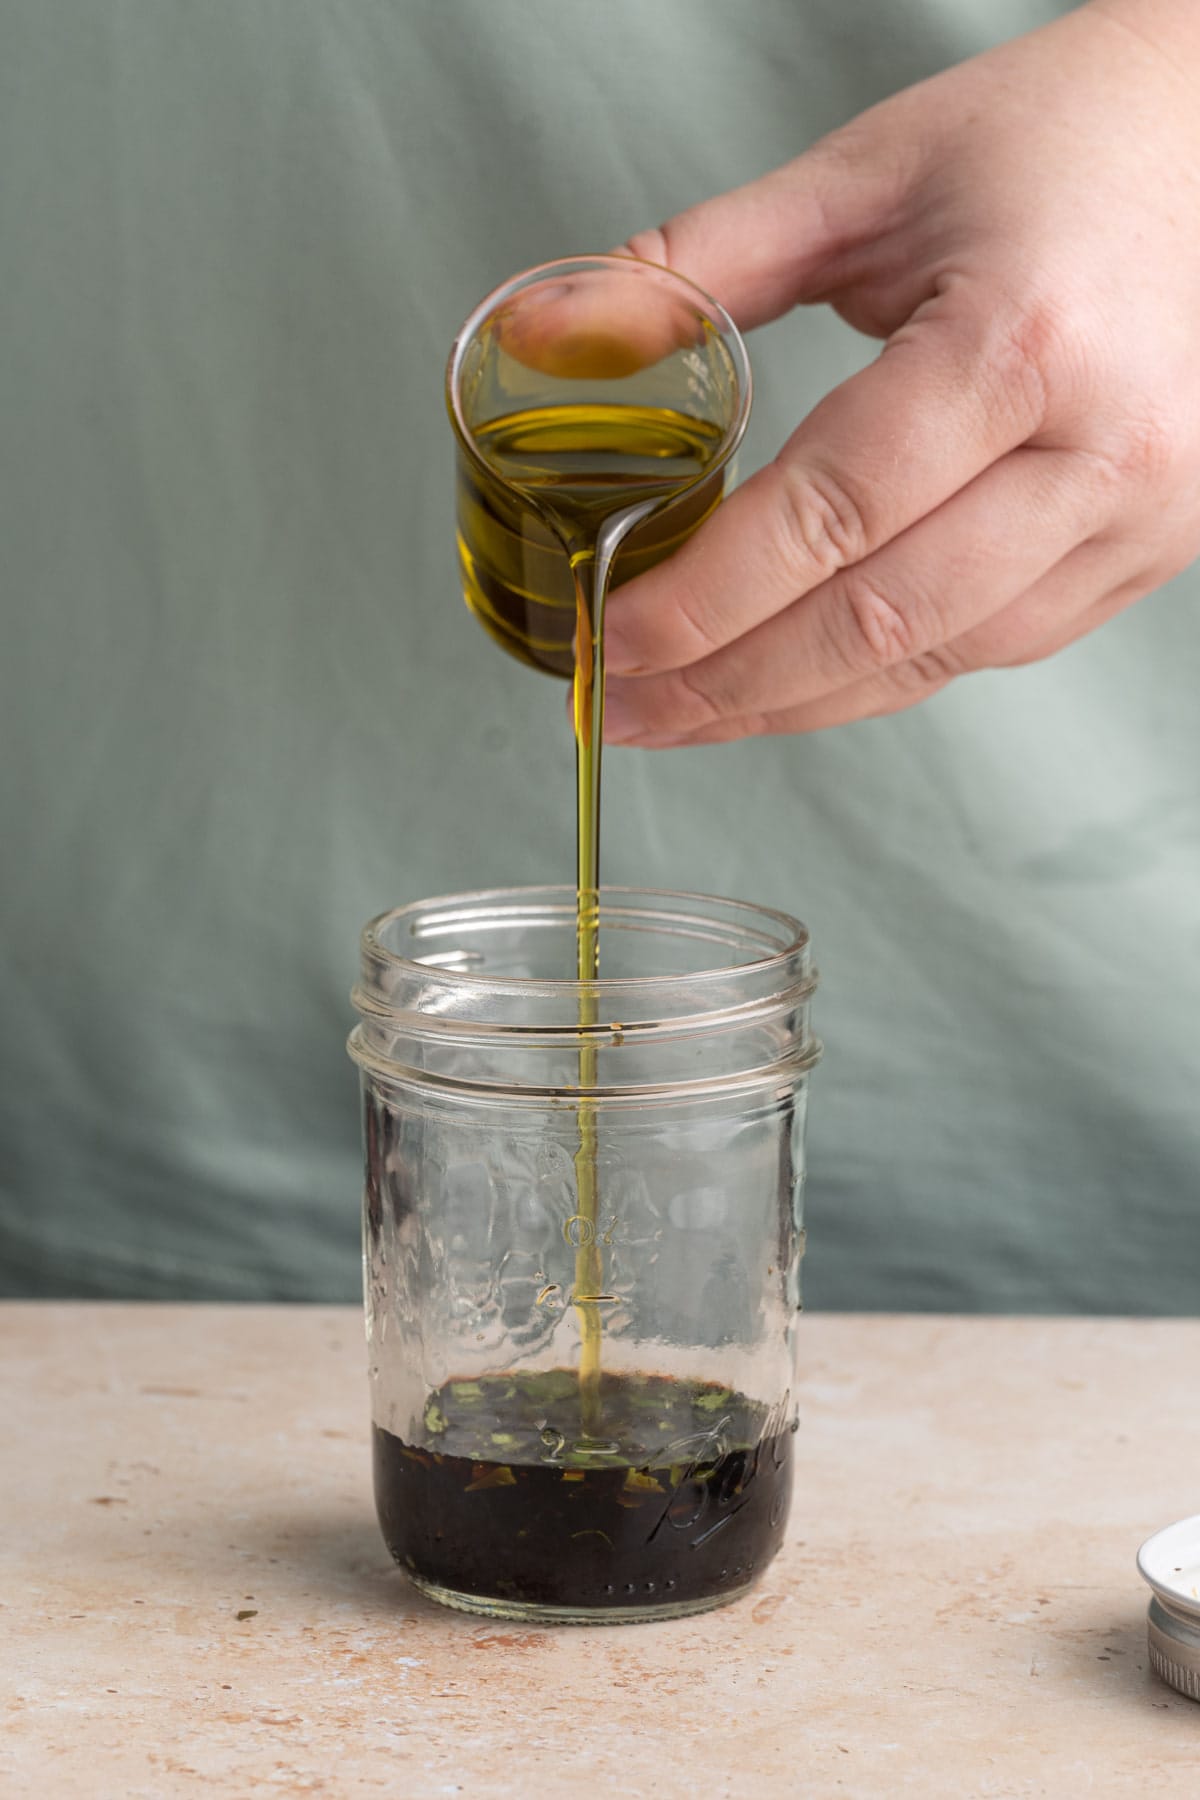 Adding vinaigrette and oil to a glass jar to shake to emulsify